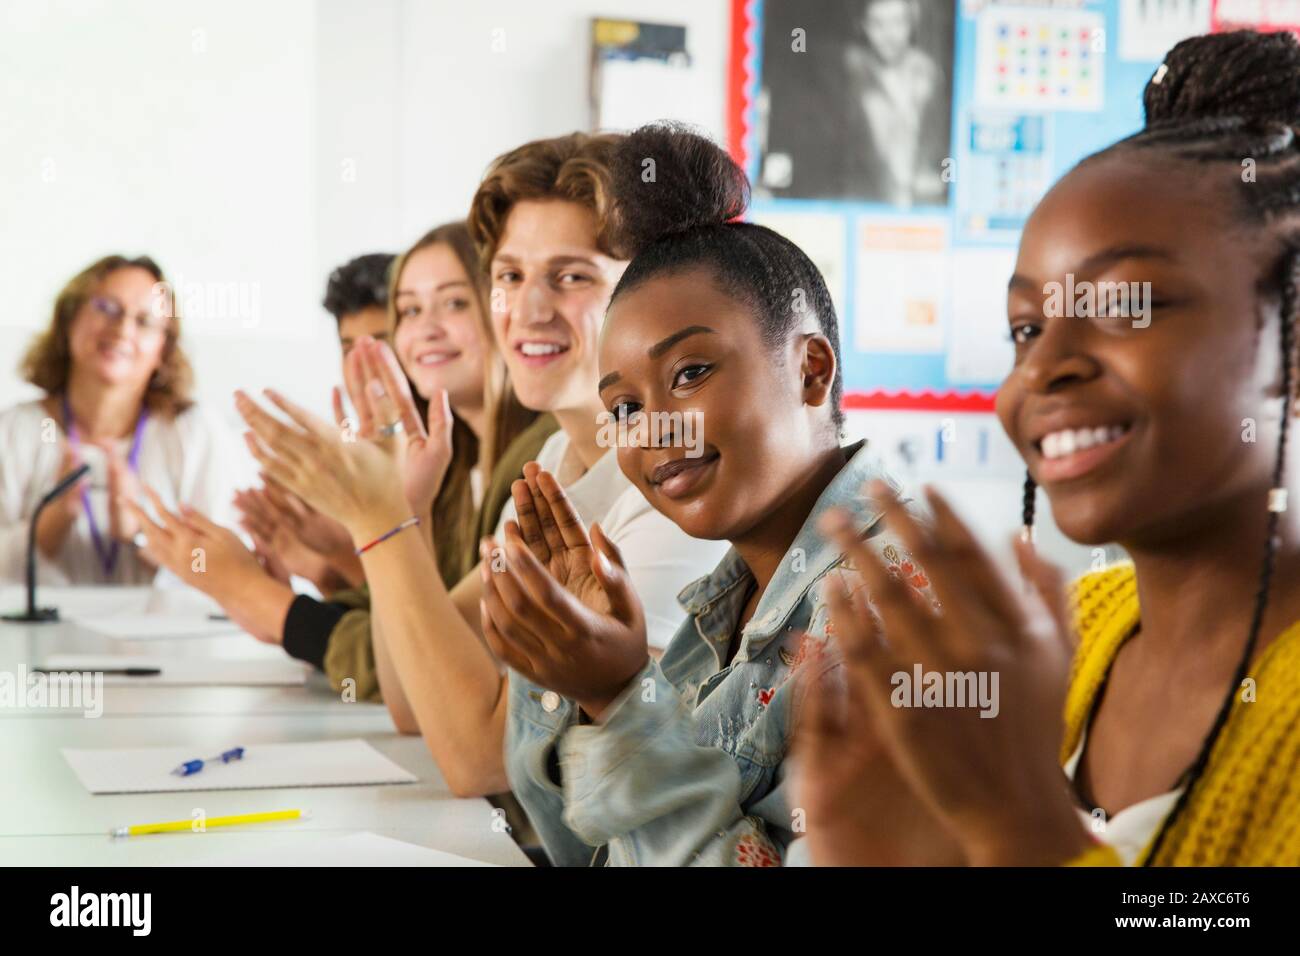 High school students clapping in debate class Stock Photo